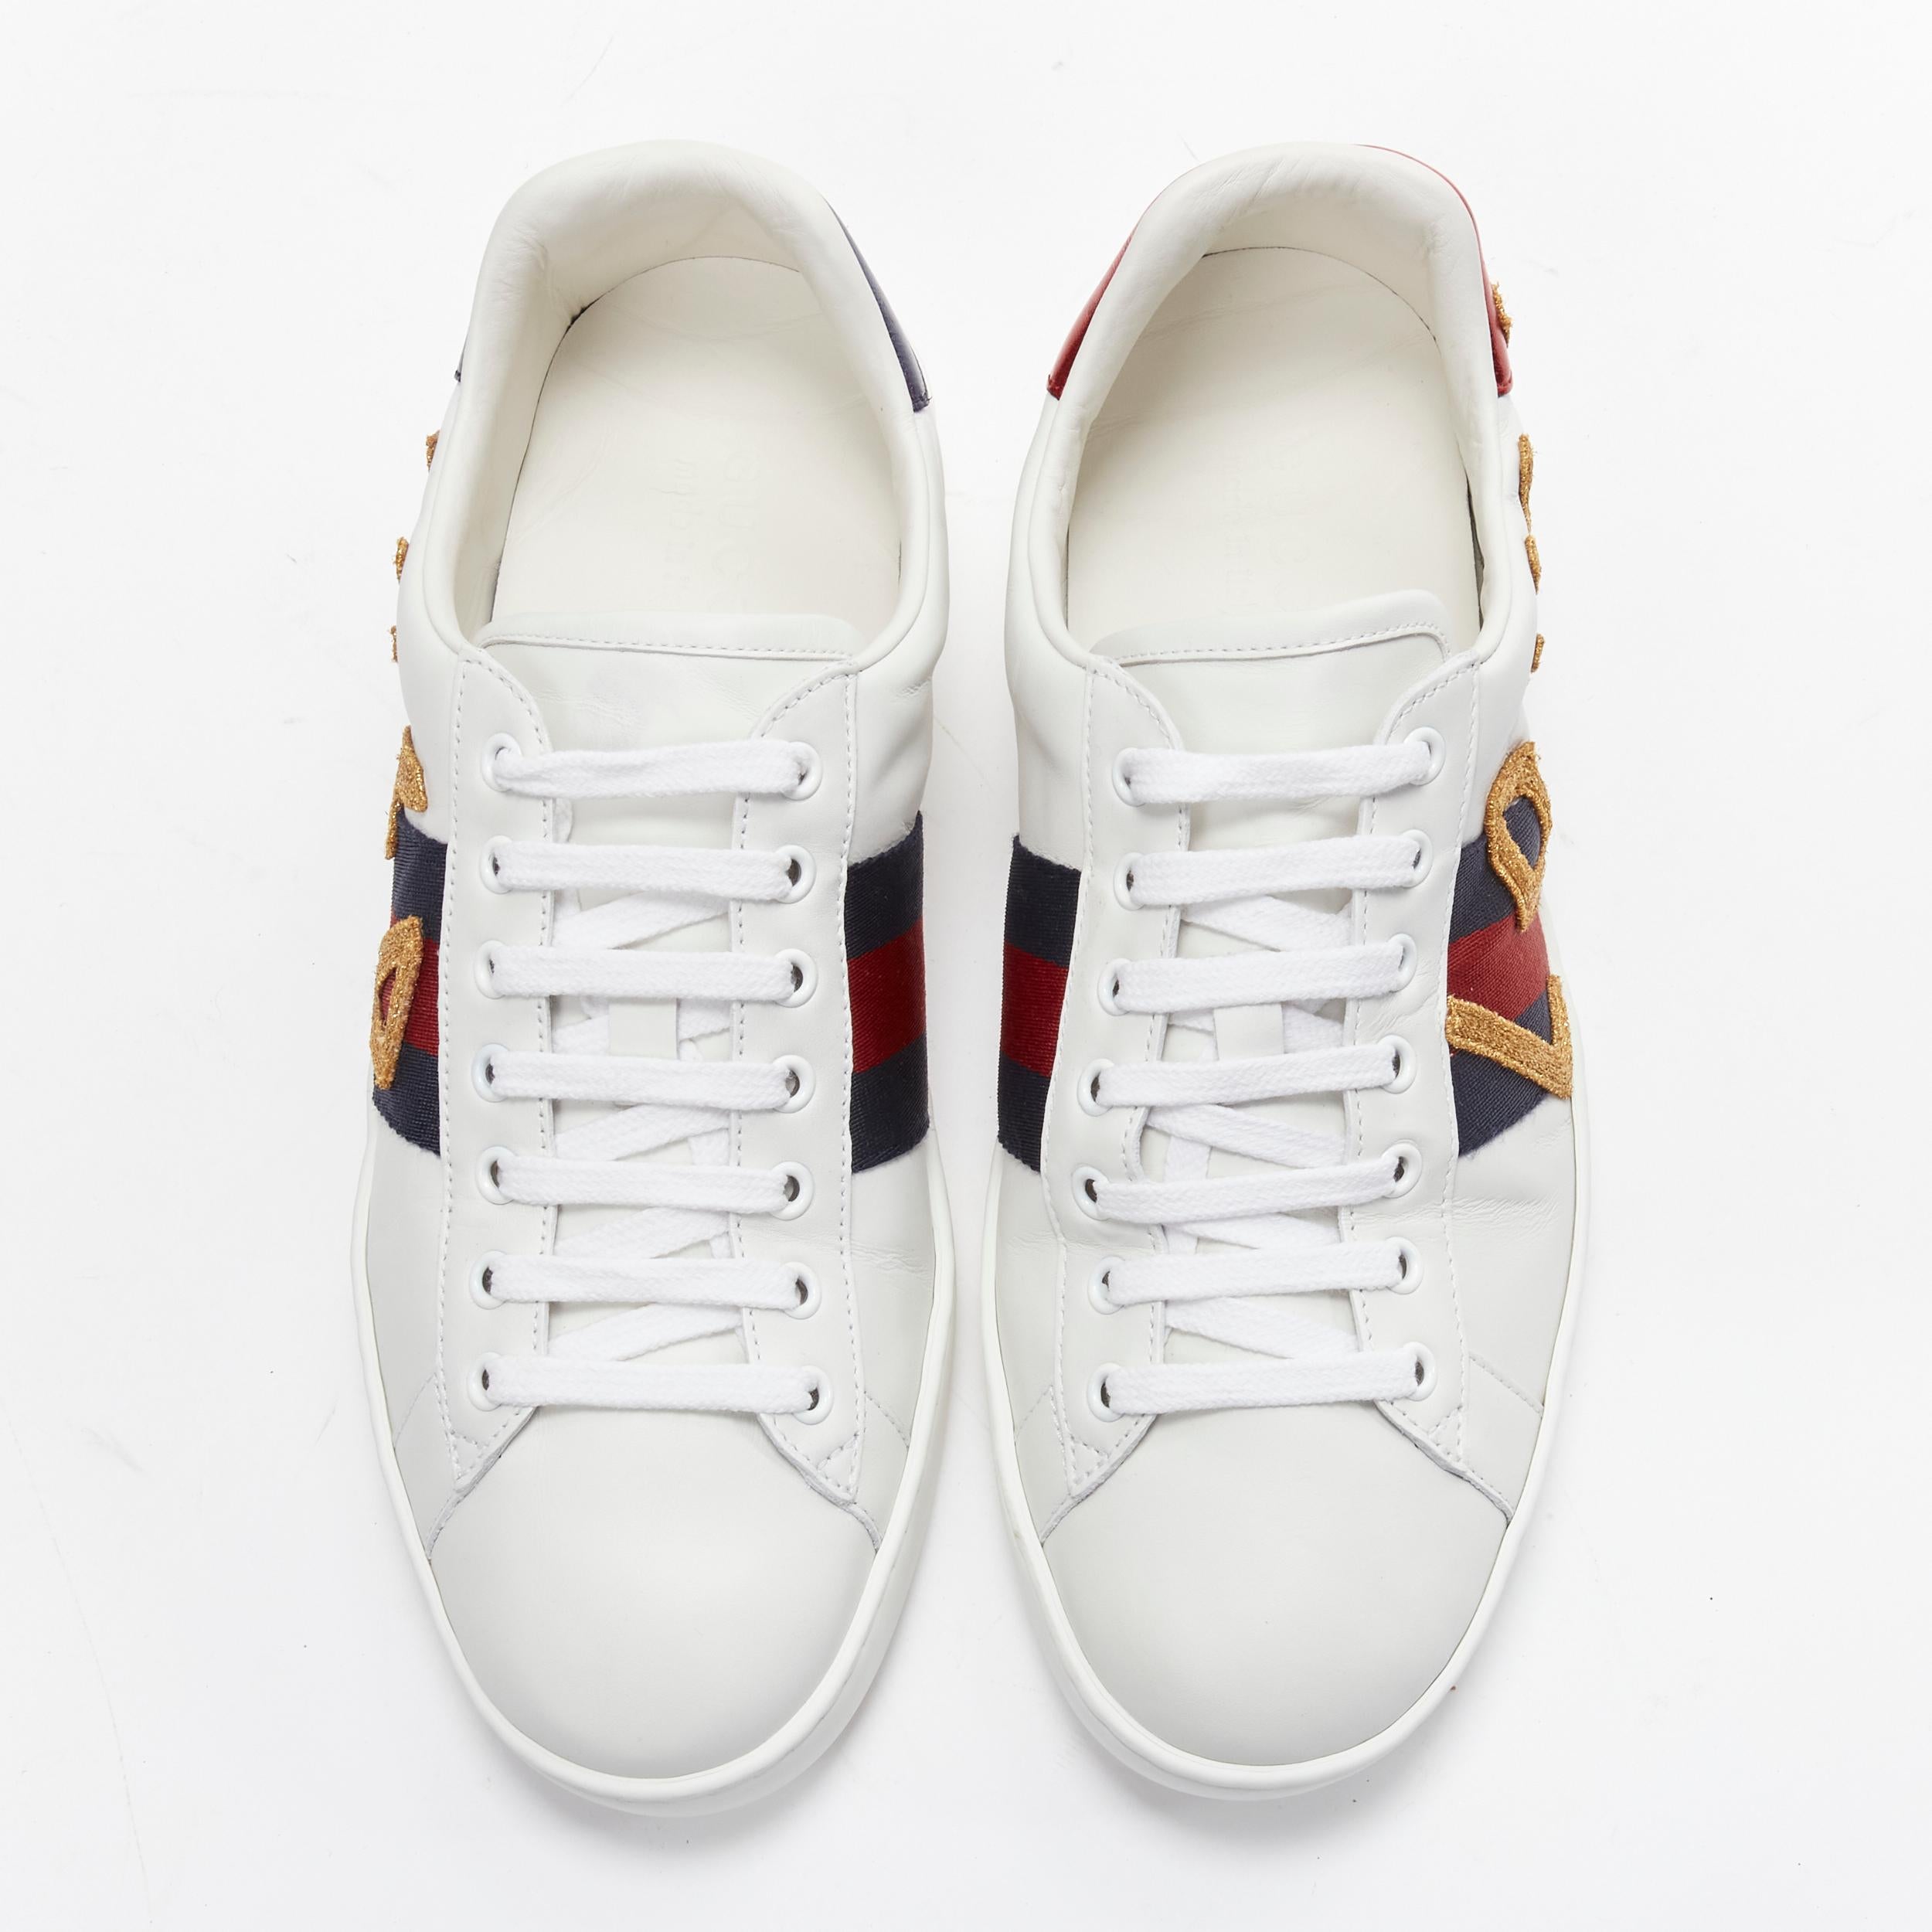 Gray GUCCI Ace Loved gold embroidered blue red web leather sneakers UK8.5 EU42.5 For Sale